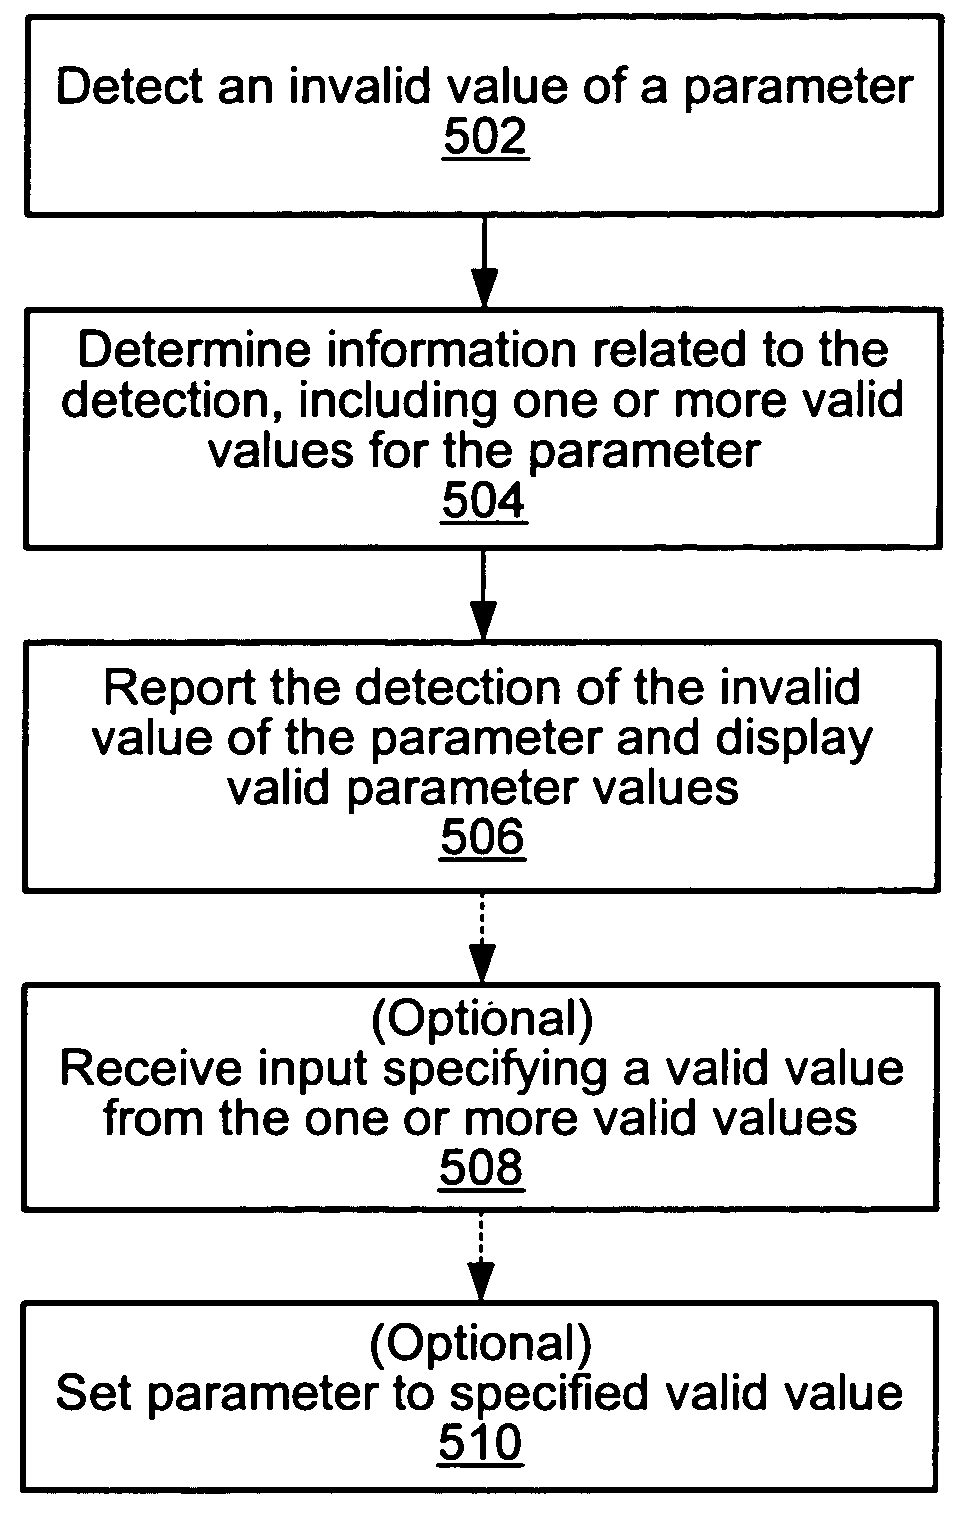 Reporting invalid parameter values for a parameter-based system